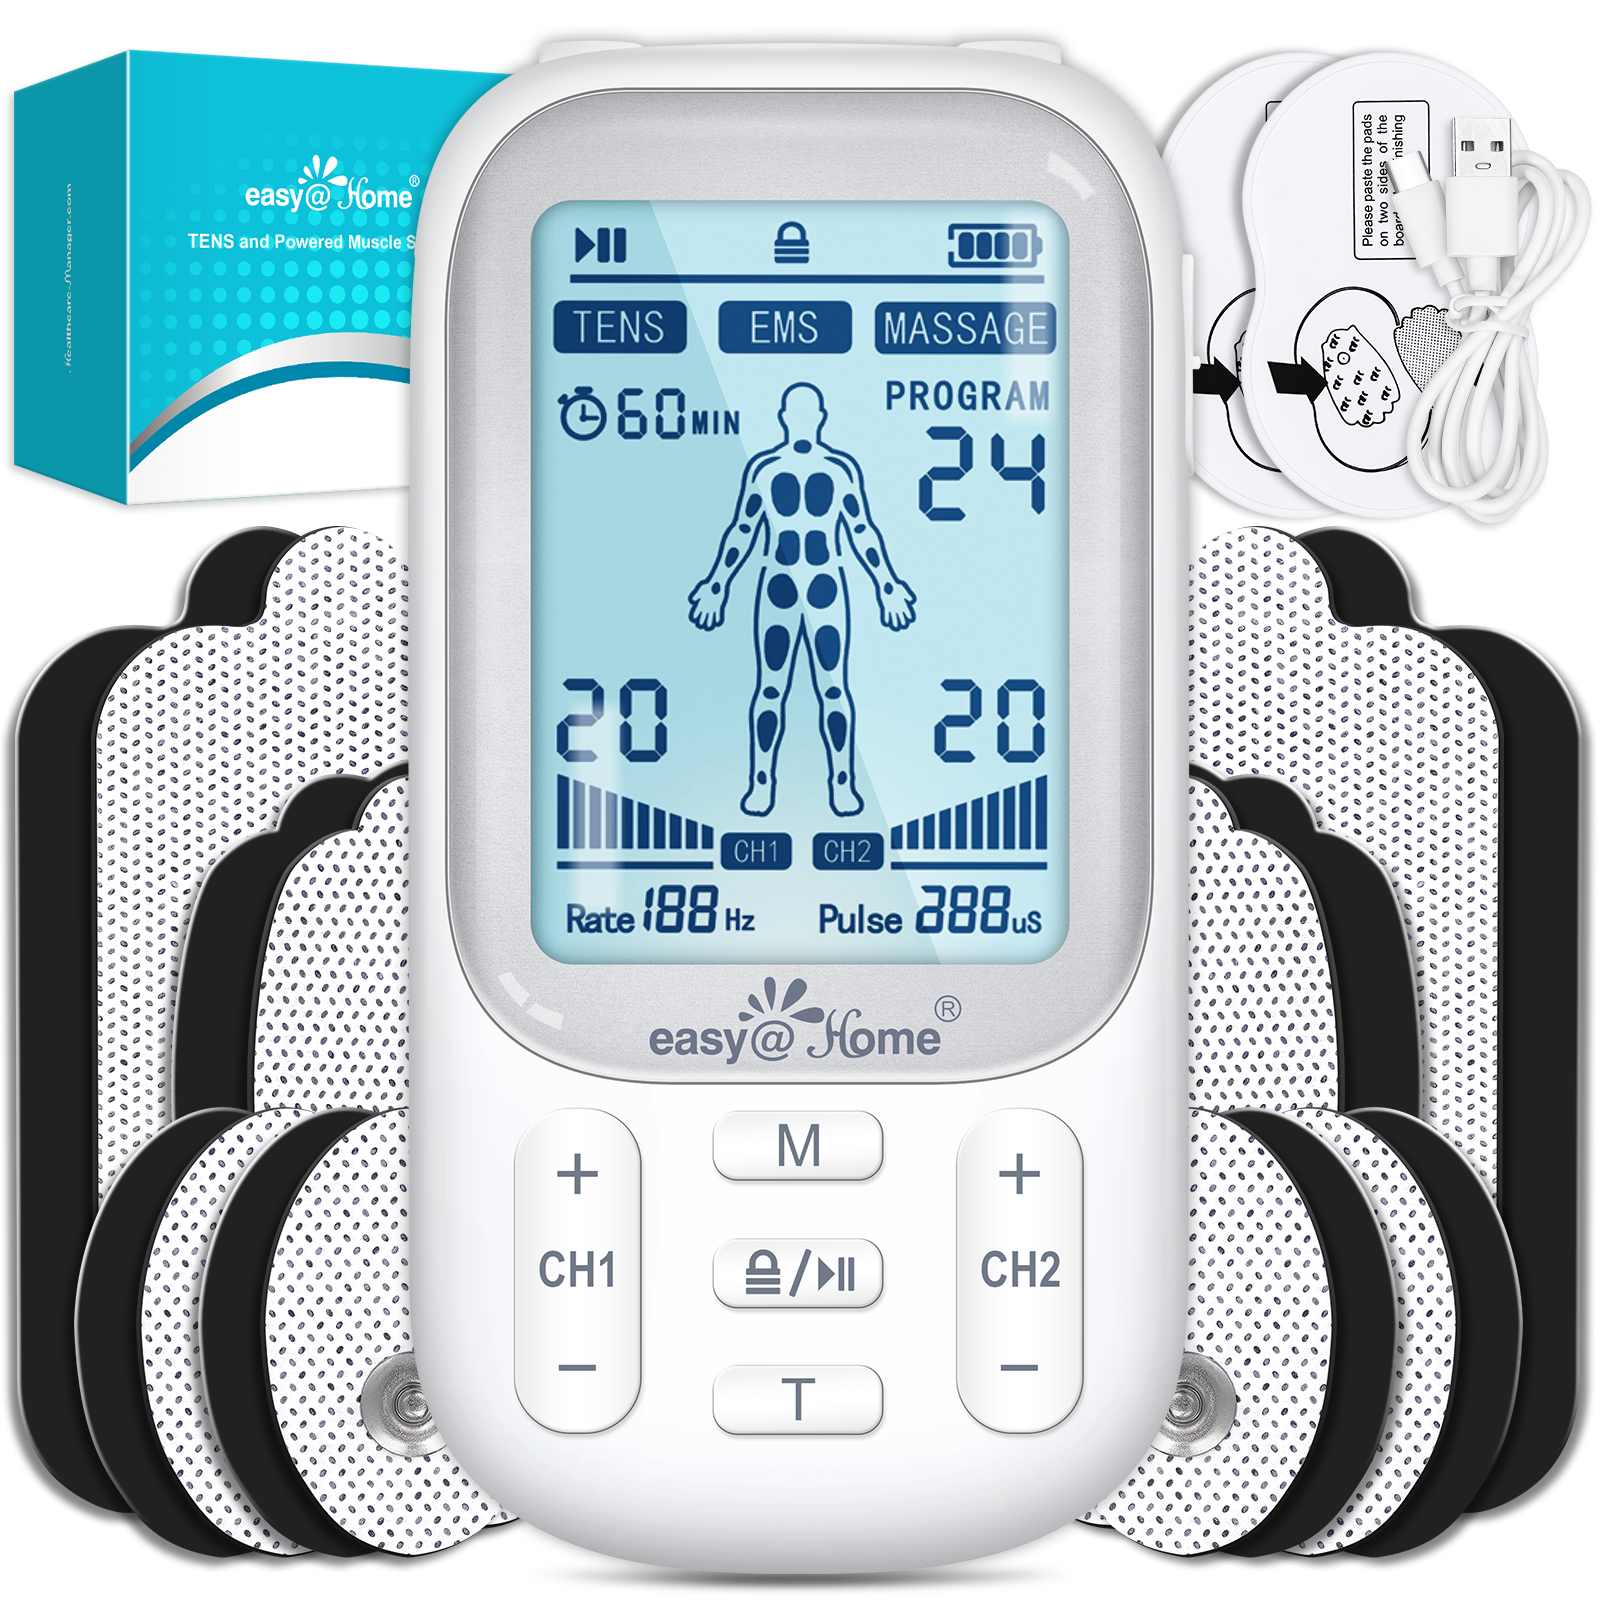 Easy@Home Professional Rechargeable Tens Unit + Heat Therapy + EMS , Portable Pain Management and Muscle Stimulator Massager, PA